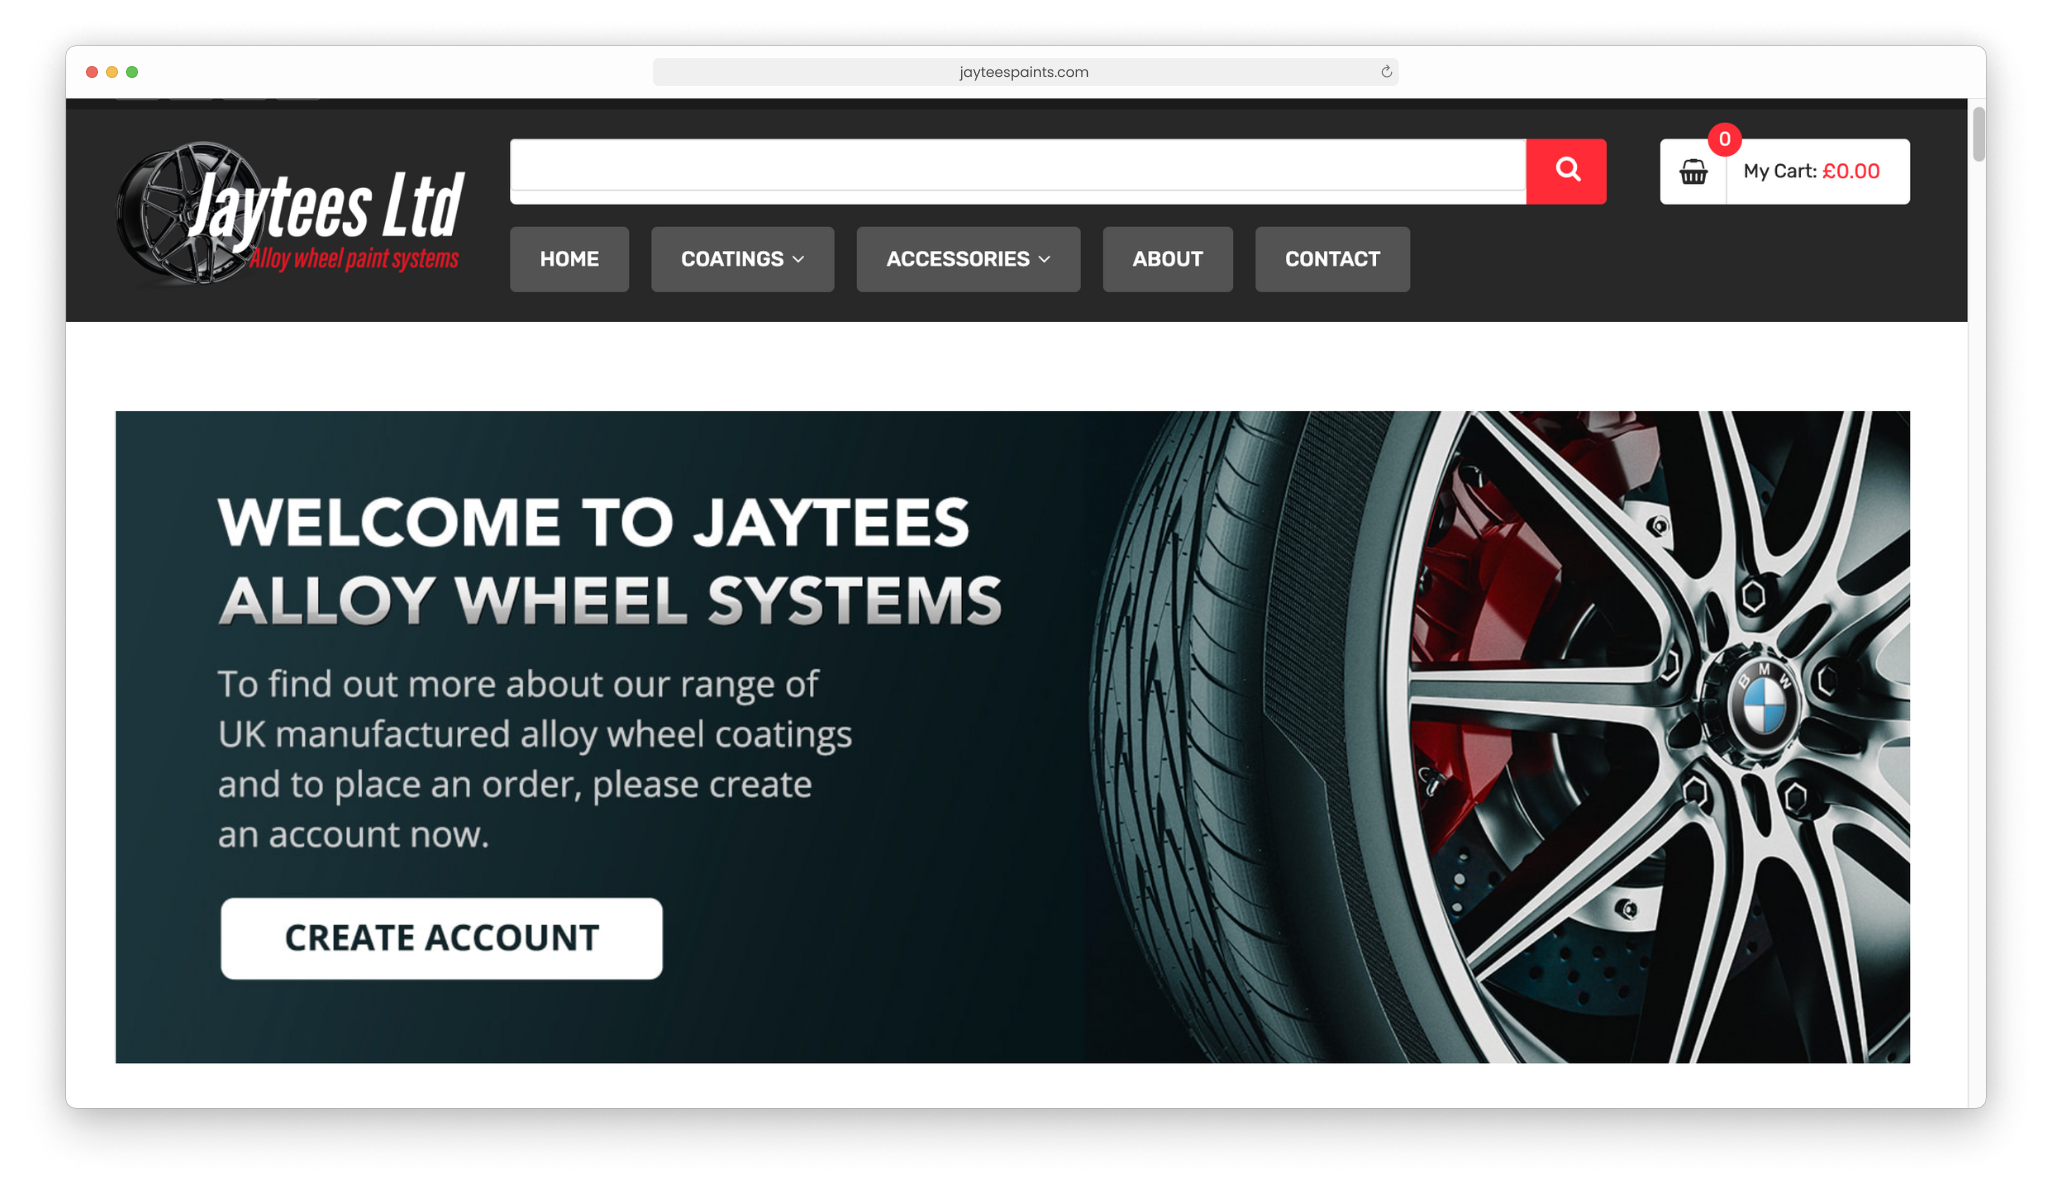 Jaytees frontpage, showing their wealth of automotive part colours, as developed on Magento by eCommerce development agency, magic42